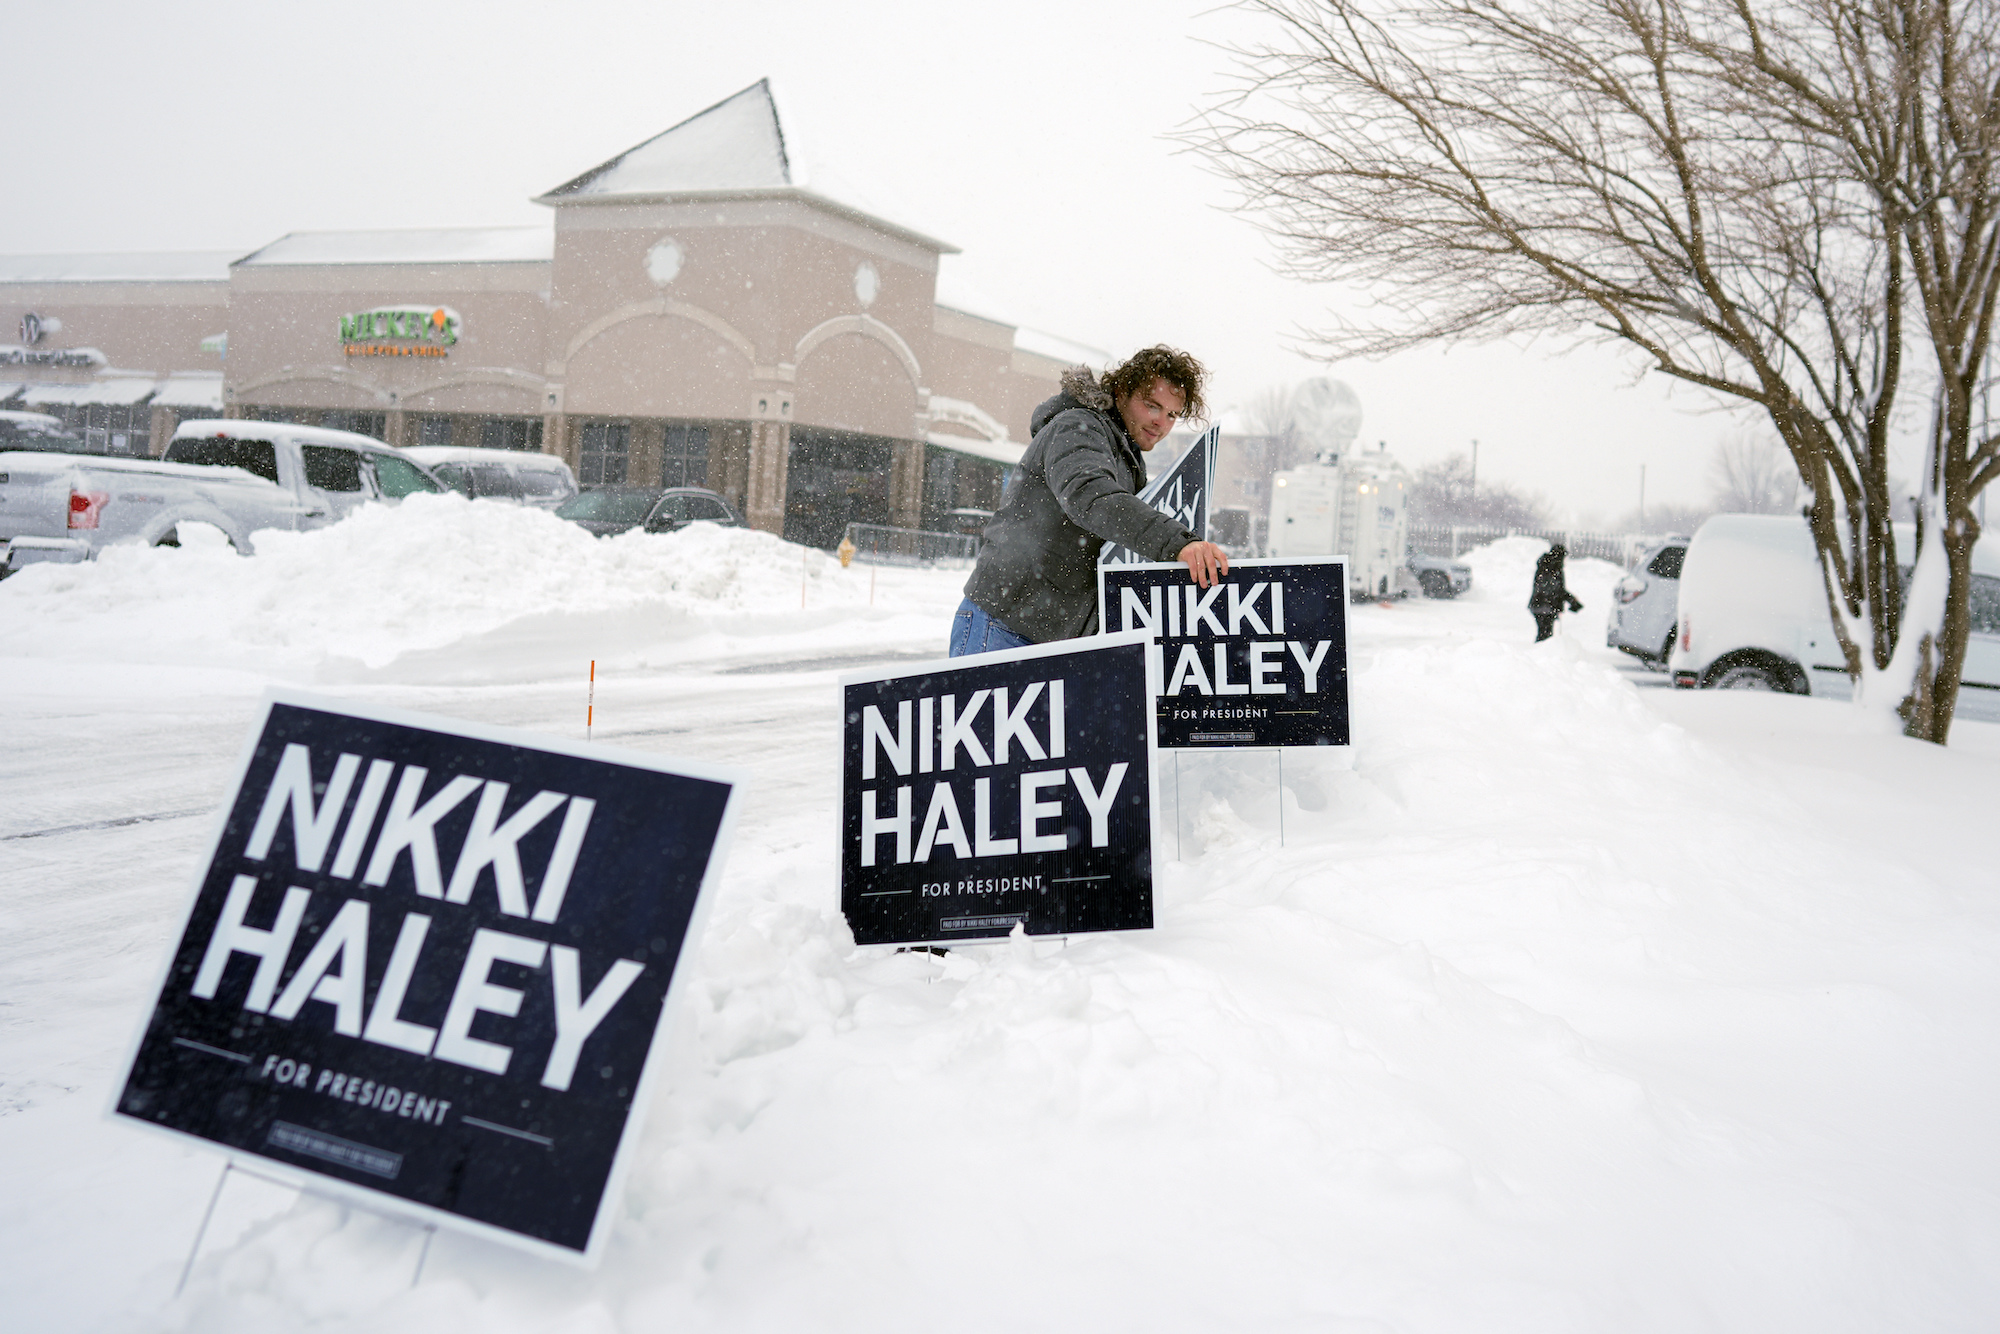 A campaign worker places signs in a snow bank before a campaign event for Nikki Haley in Waukee, Iowa, on Tuesday.